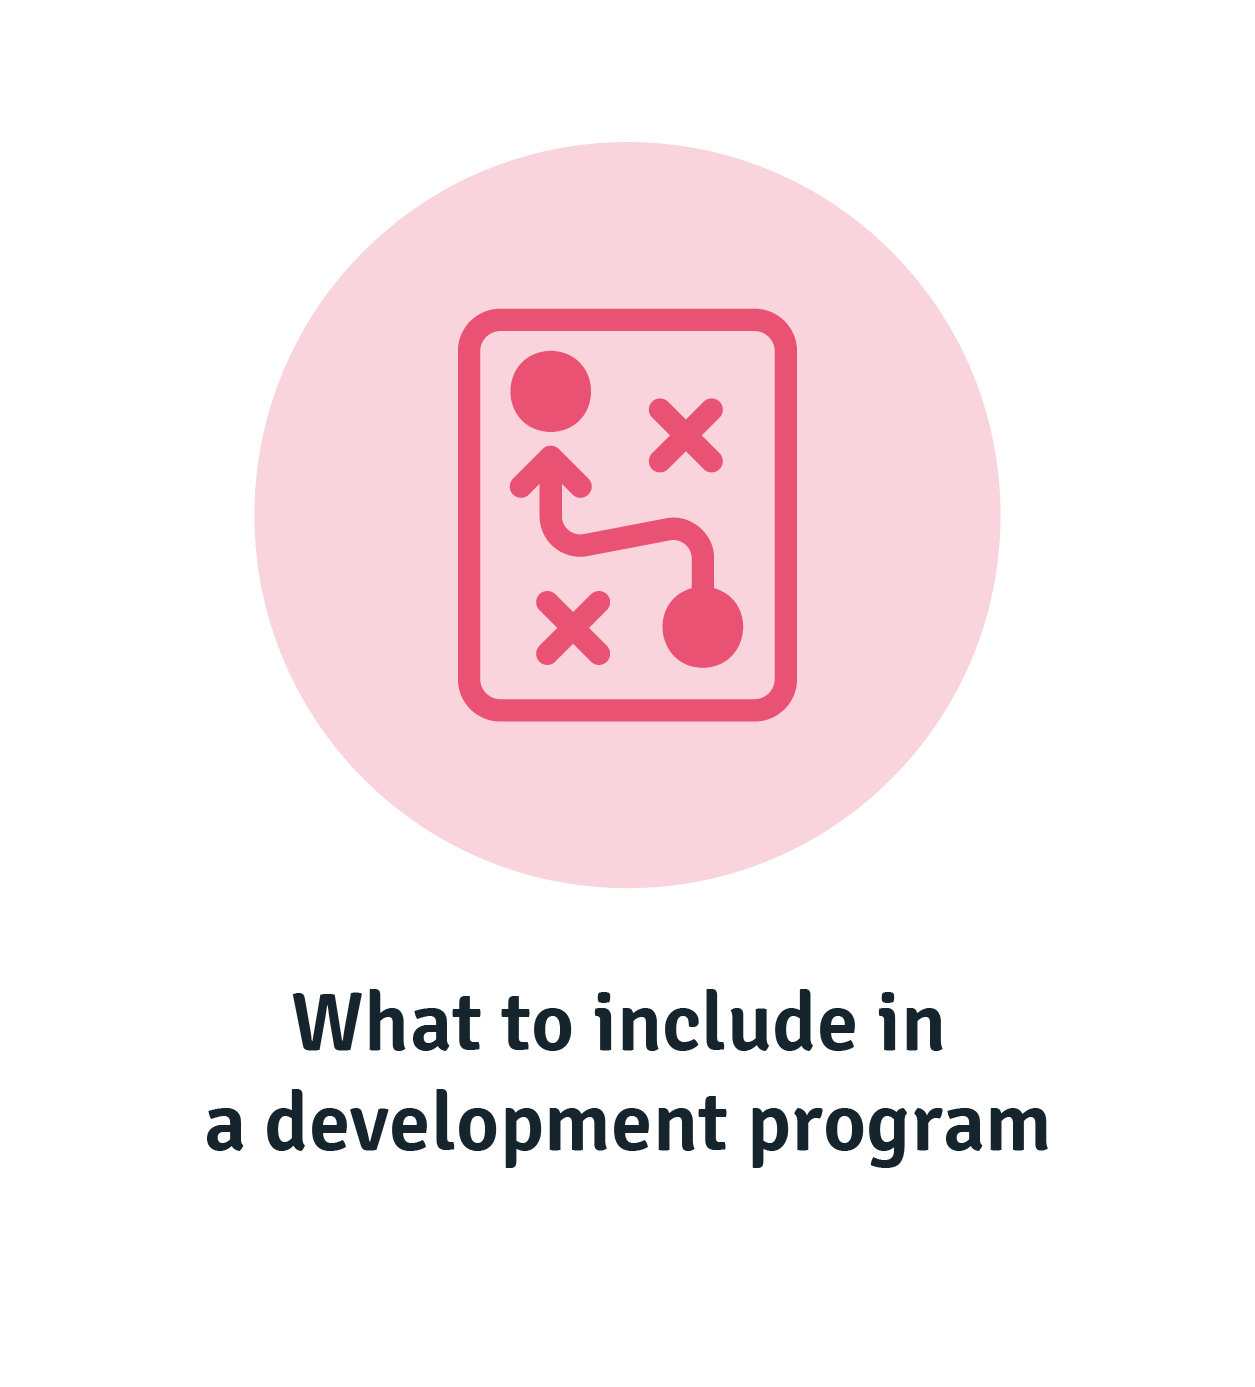 What to include in a development program